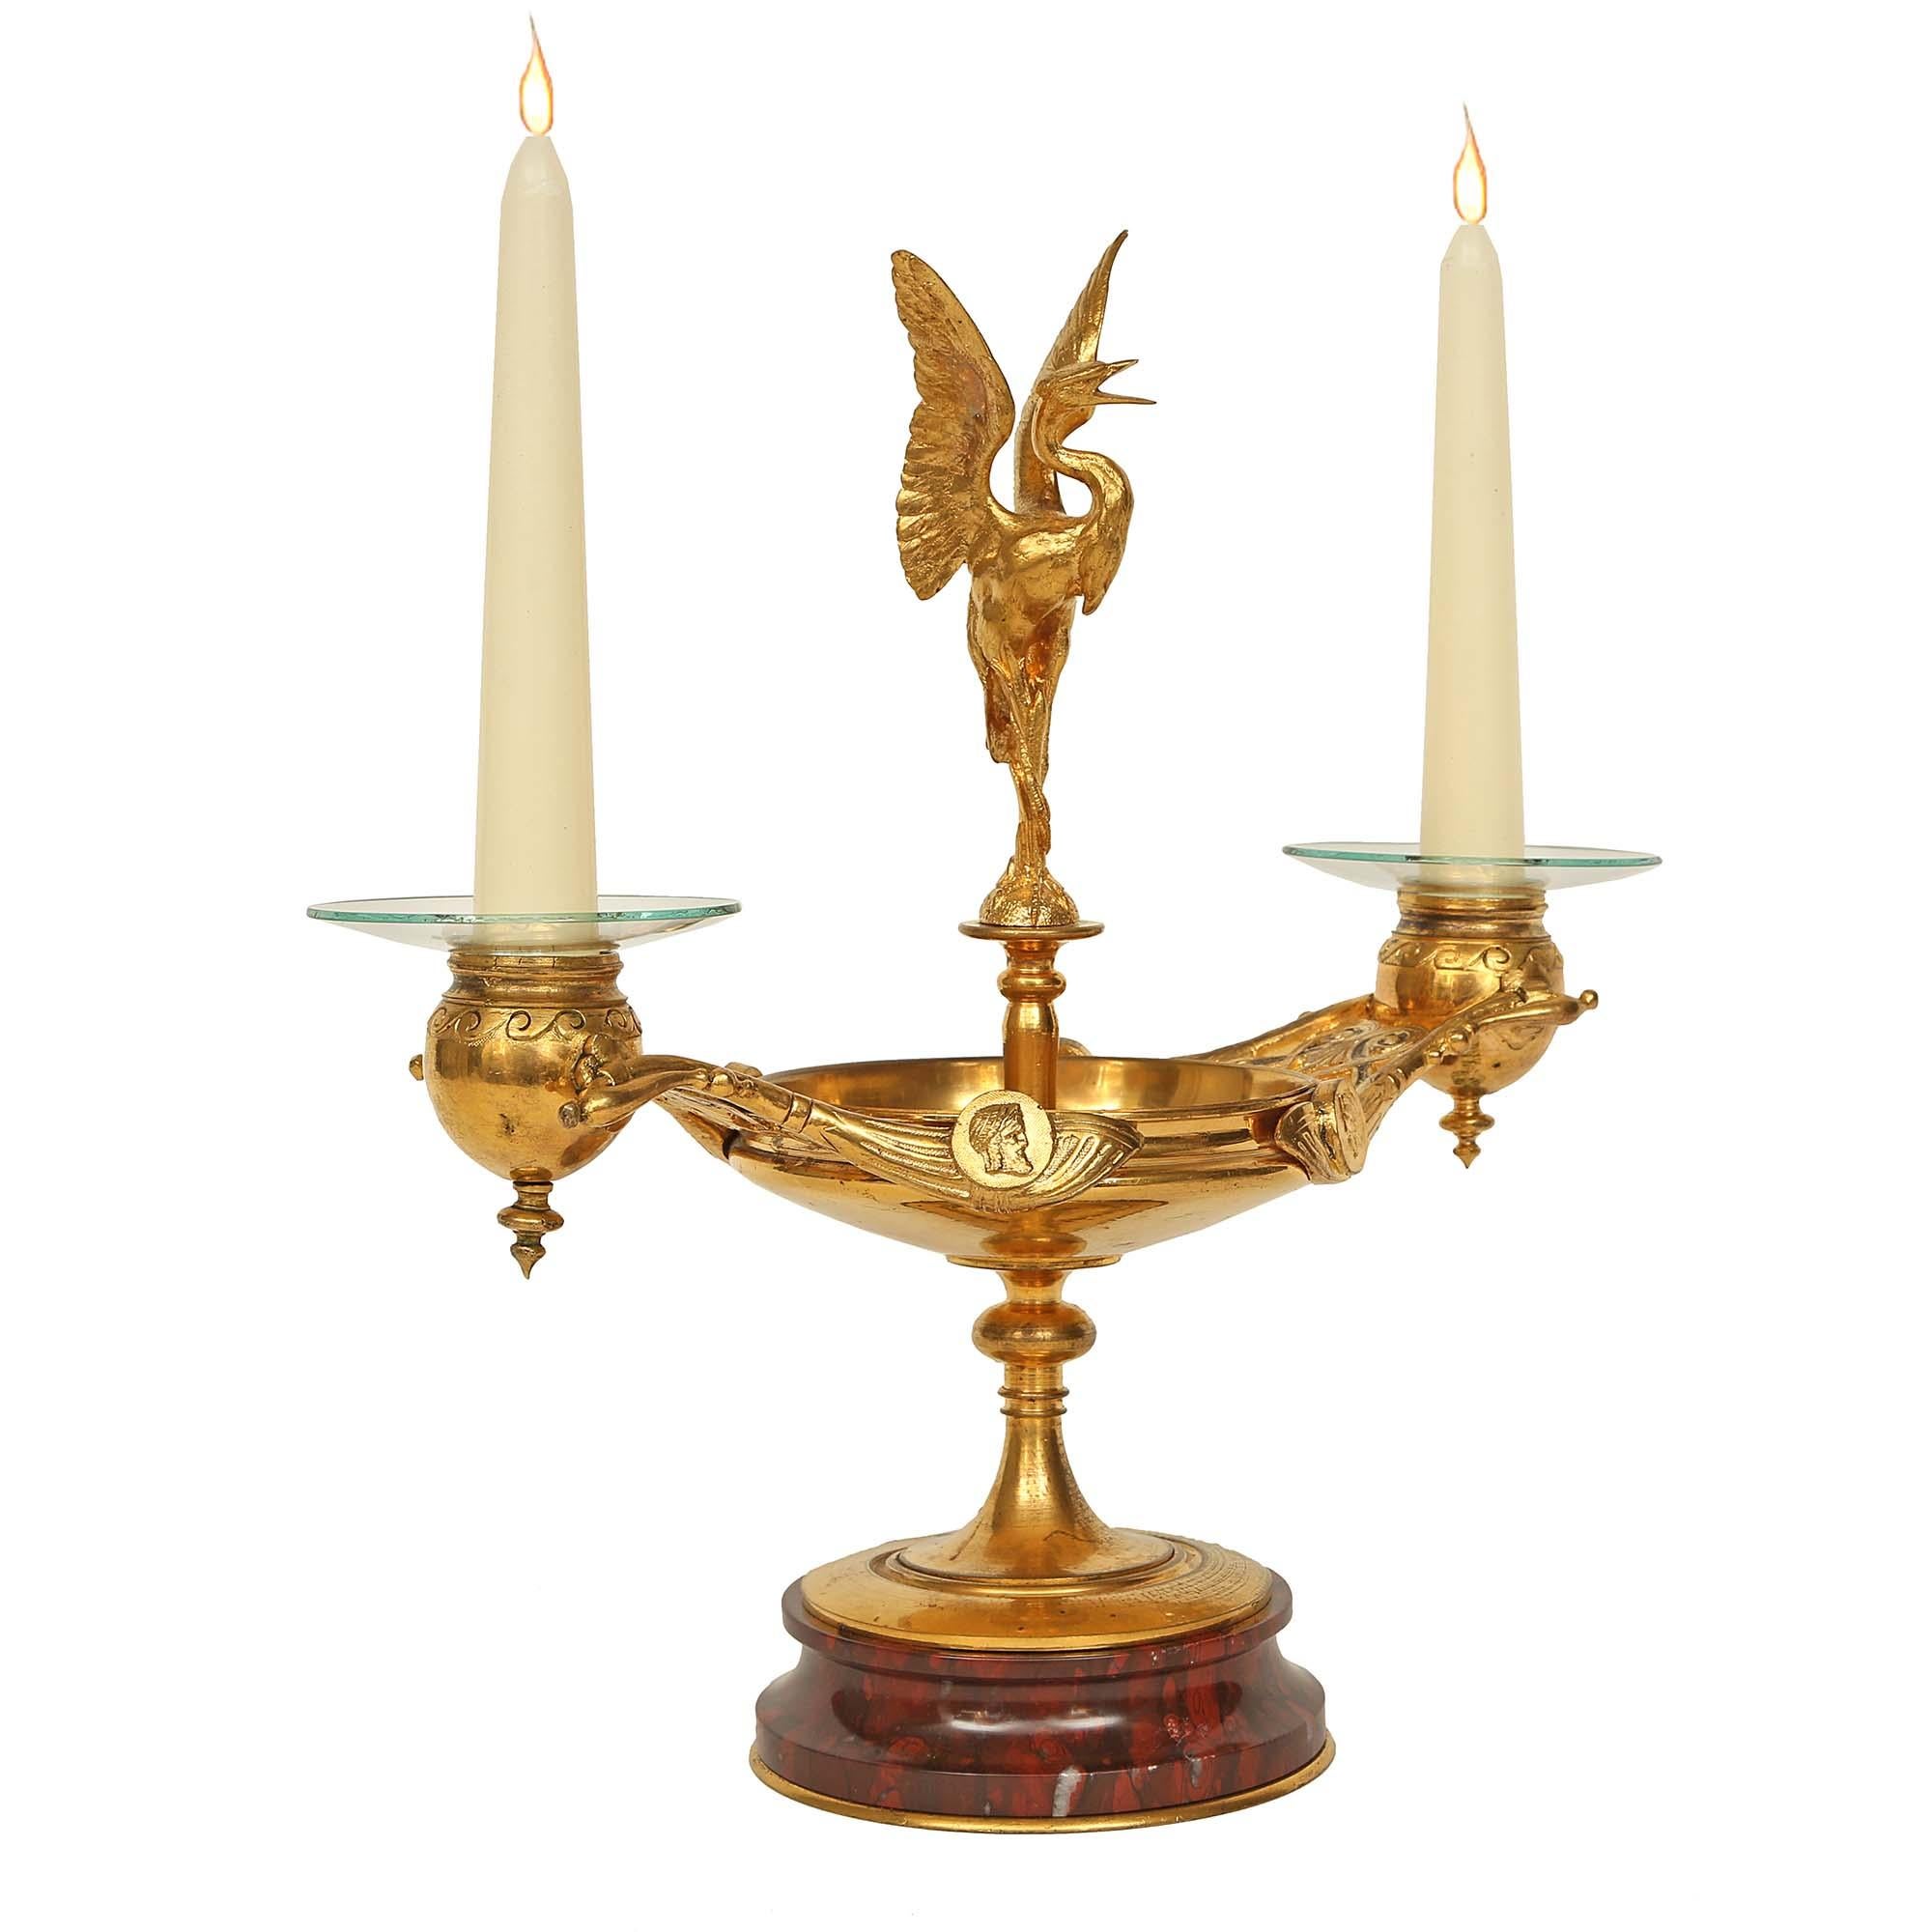 A stunning pair of French 19th century Renaissance st. ormolu and marble candelabras. Each candelabras is raised by a circular moulded Rouge Griotte marble base with a bottom decorative ormolu band. Above the elegant socle pedestal is a bowl with a